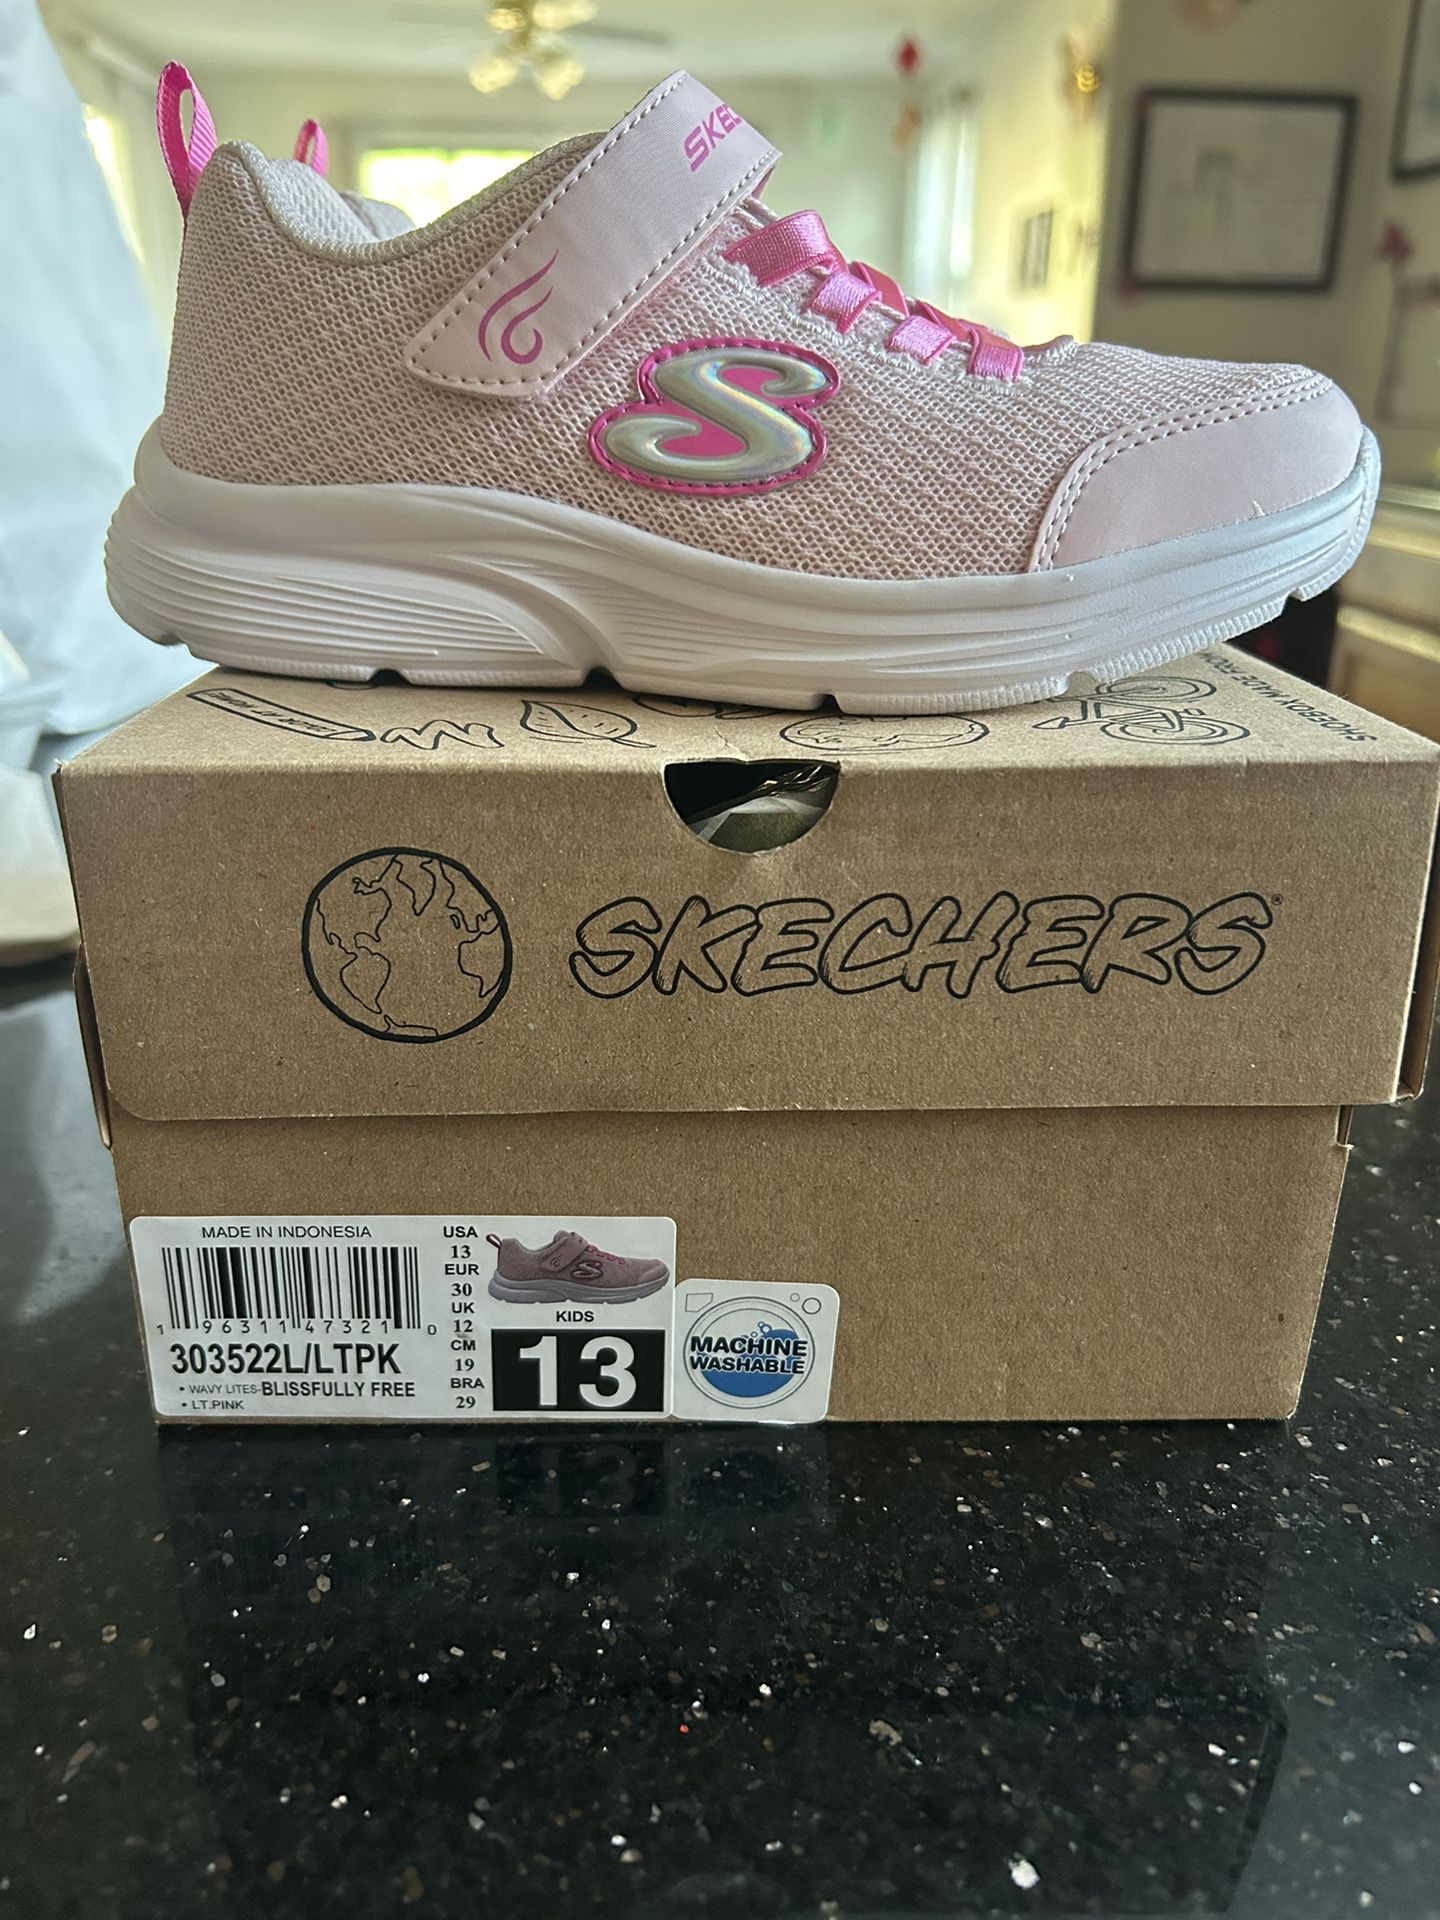 Sketchers Girls Shoes, Pink, Size 13, 